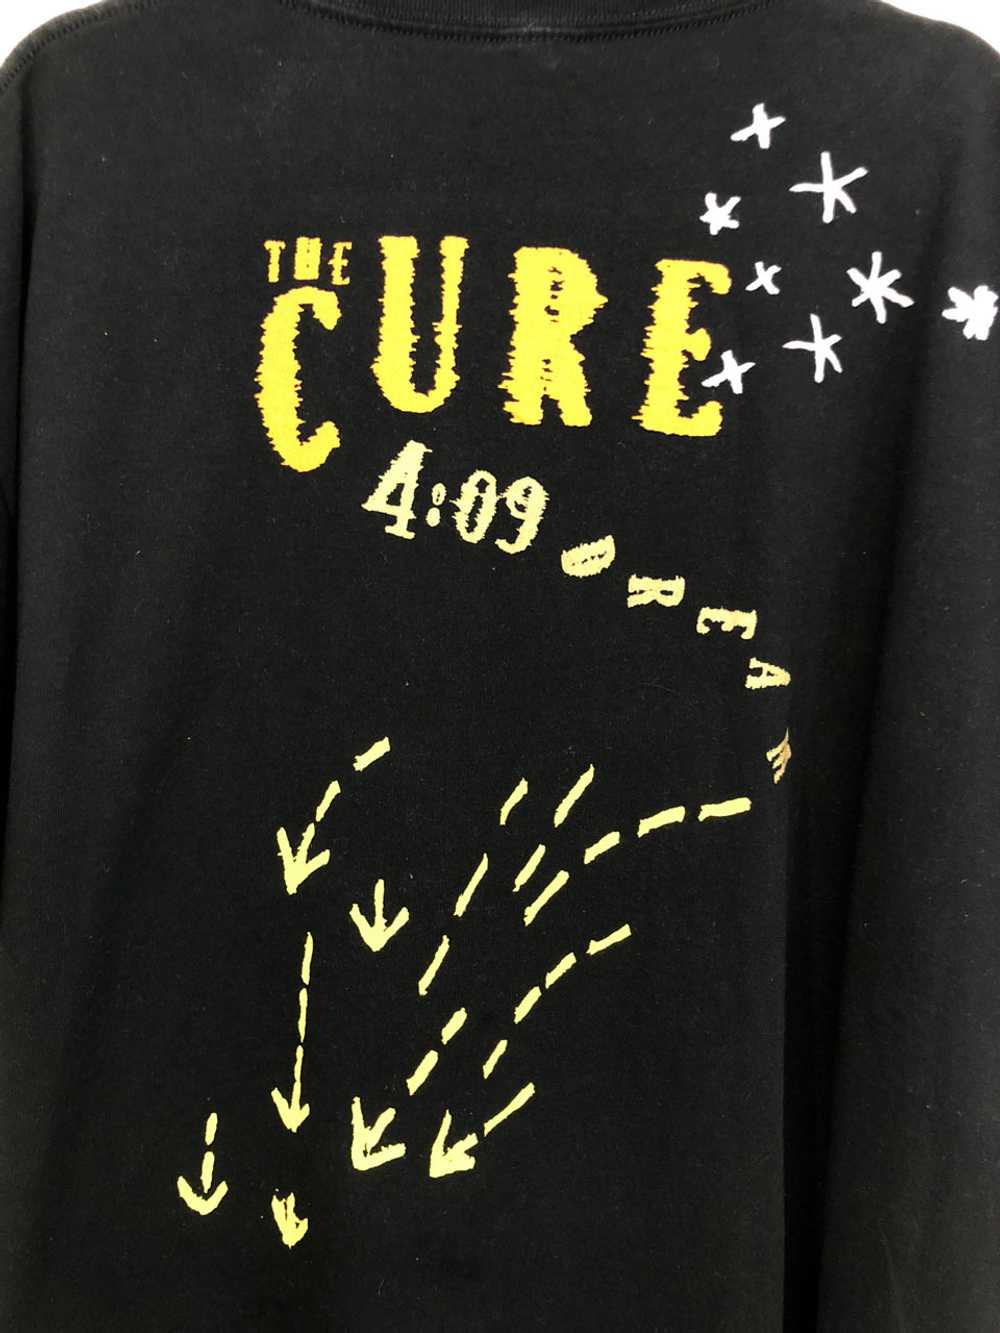 The Cure T-Shirt - image 4